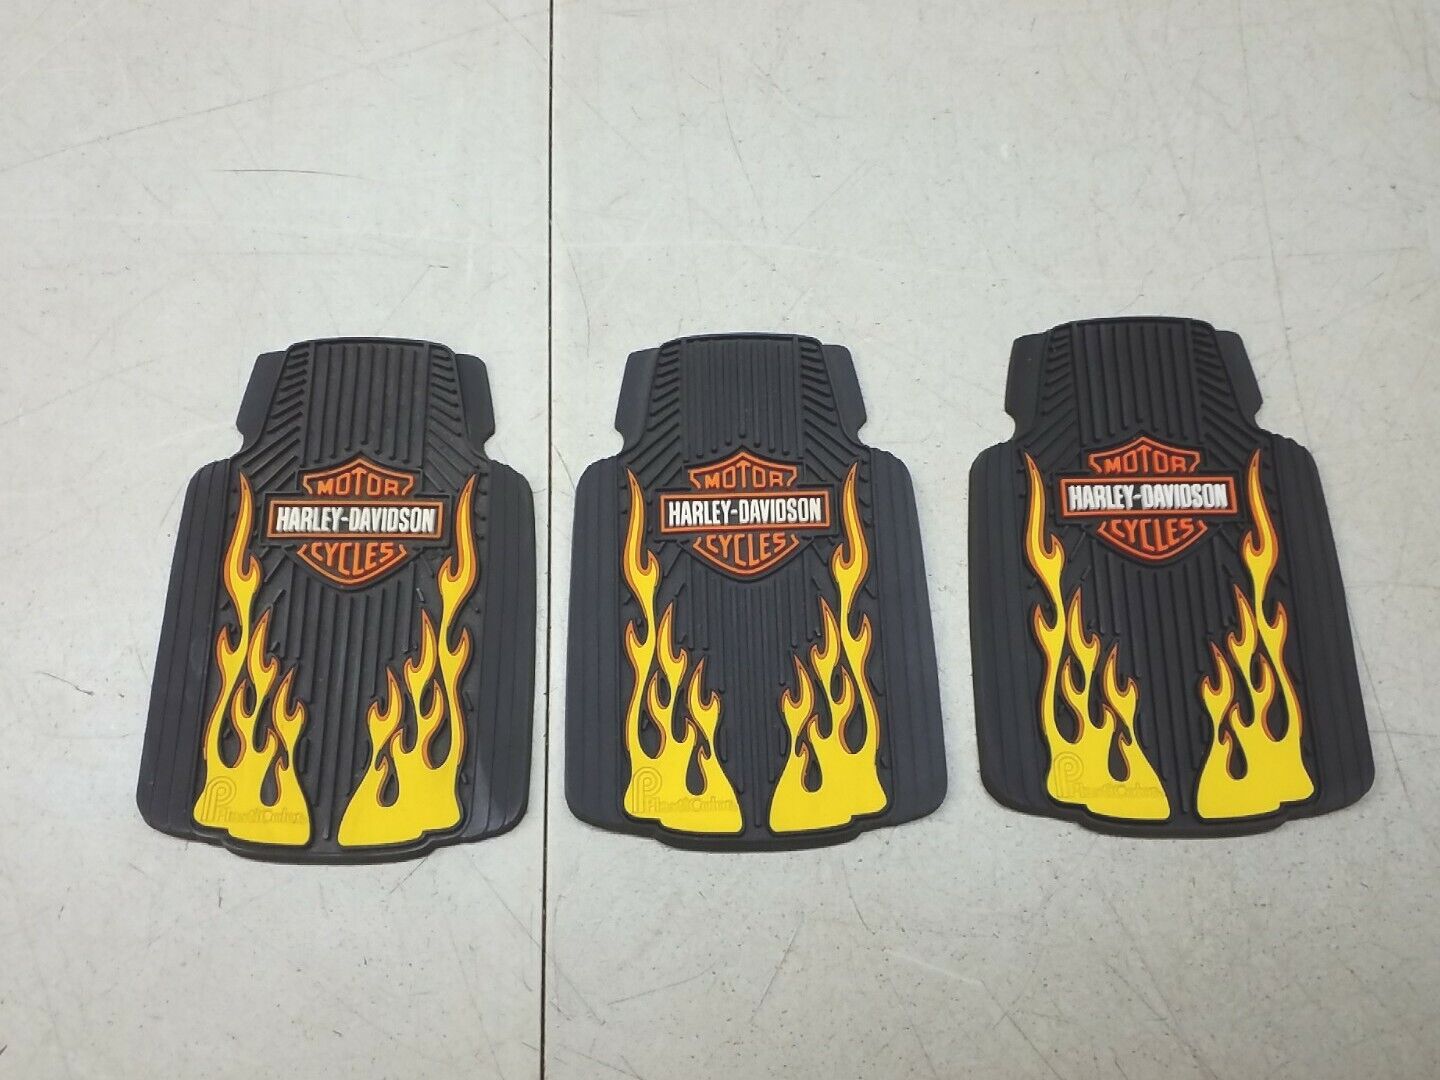 Harley Davidson Motorcycles Rubber Drink Coaster Set Of 3 Mats By Plasticolor